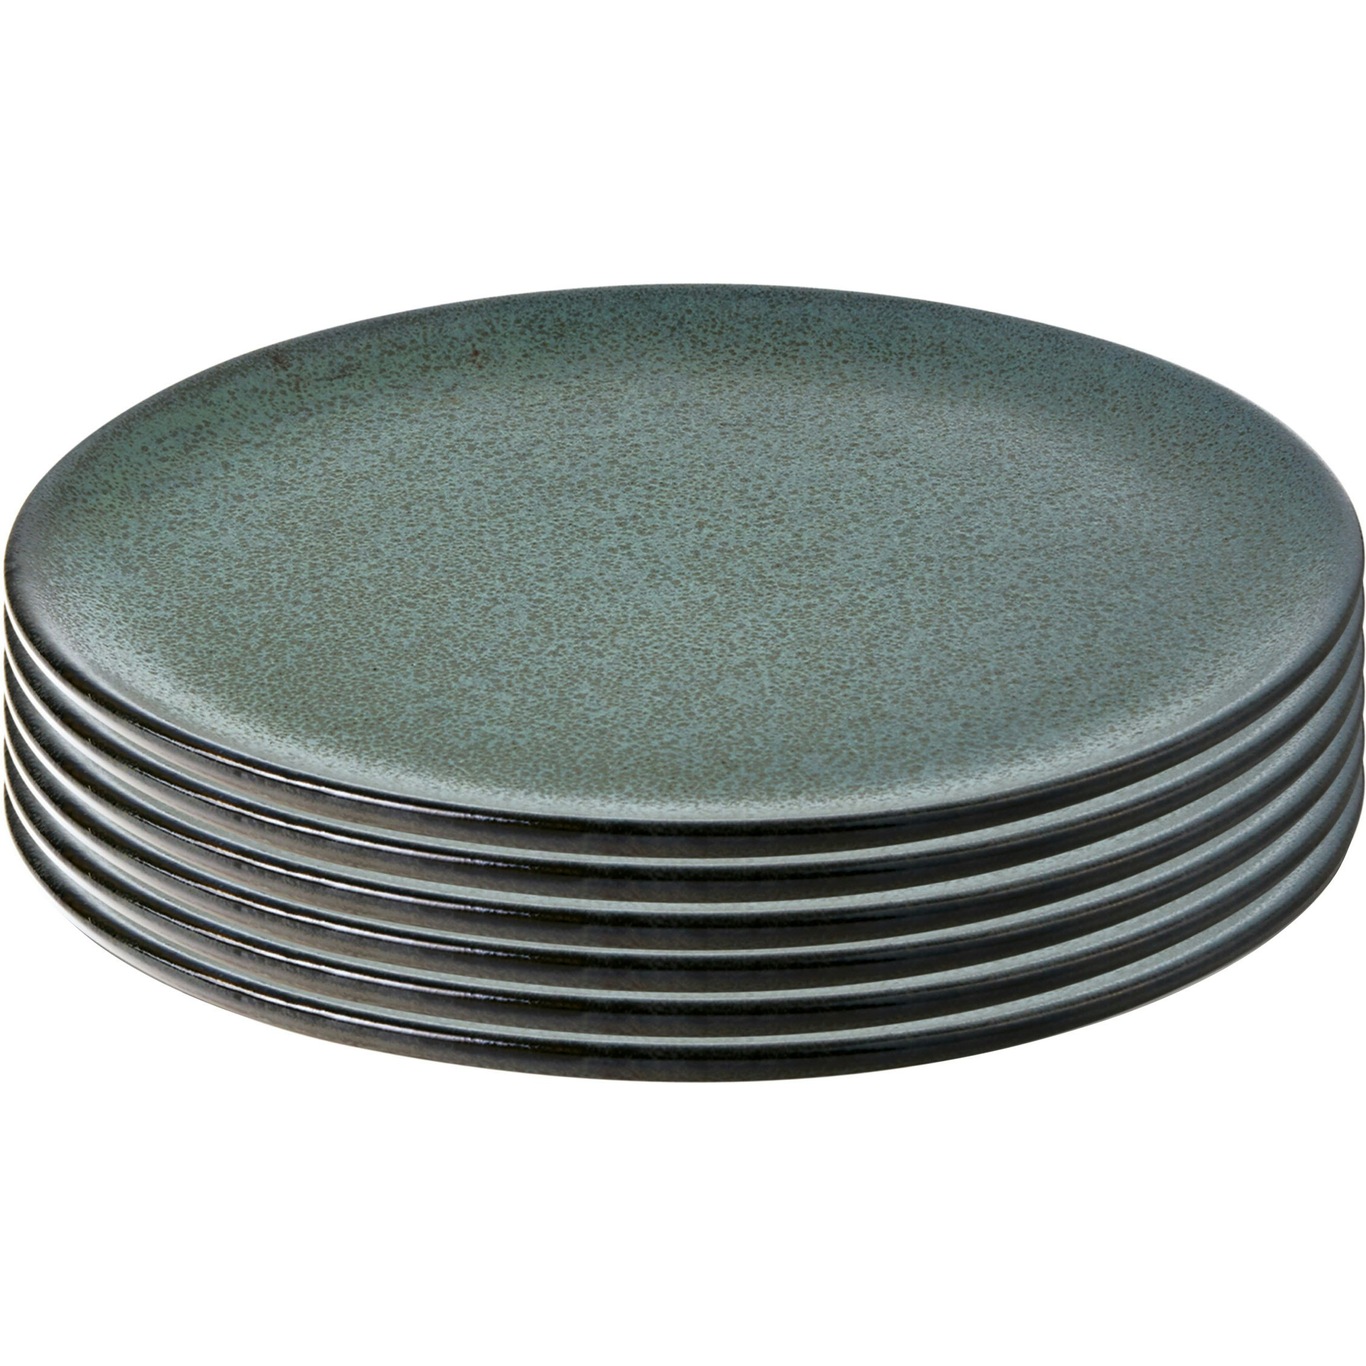 Raw Dinner Plate 28 cm 6-pack, Northern Green